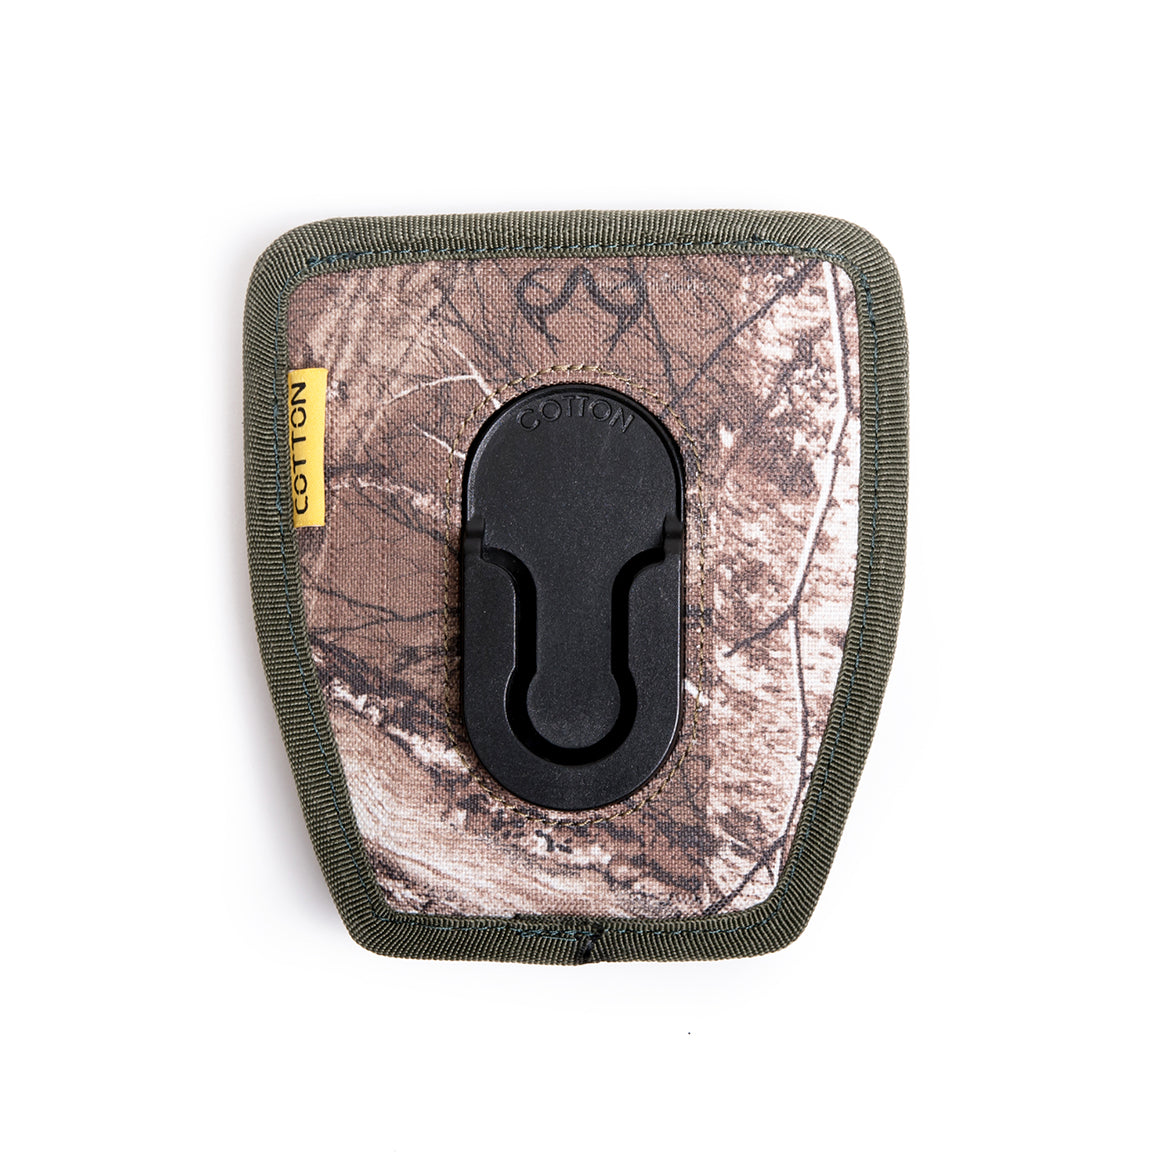 Cotton Carrier Realtree Camo G3 Wanderer Camera Side Holster